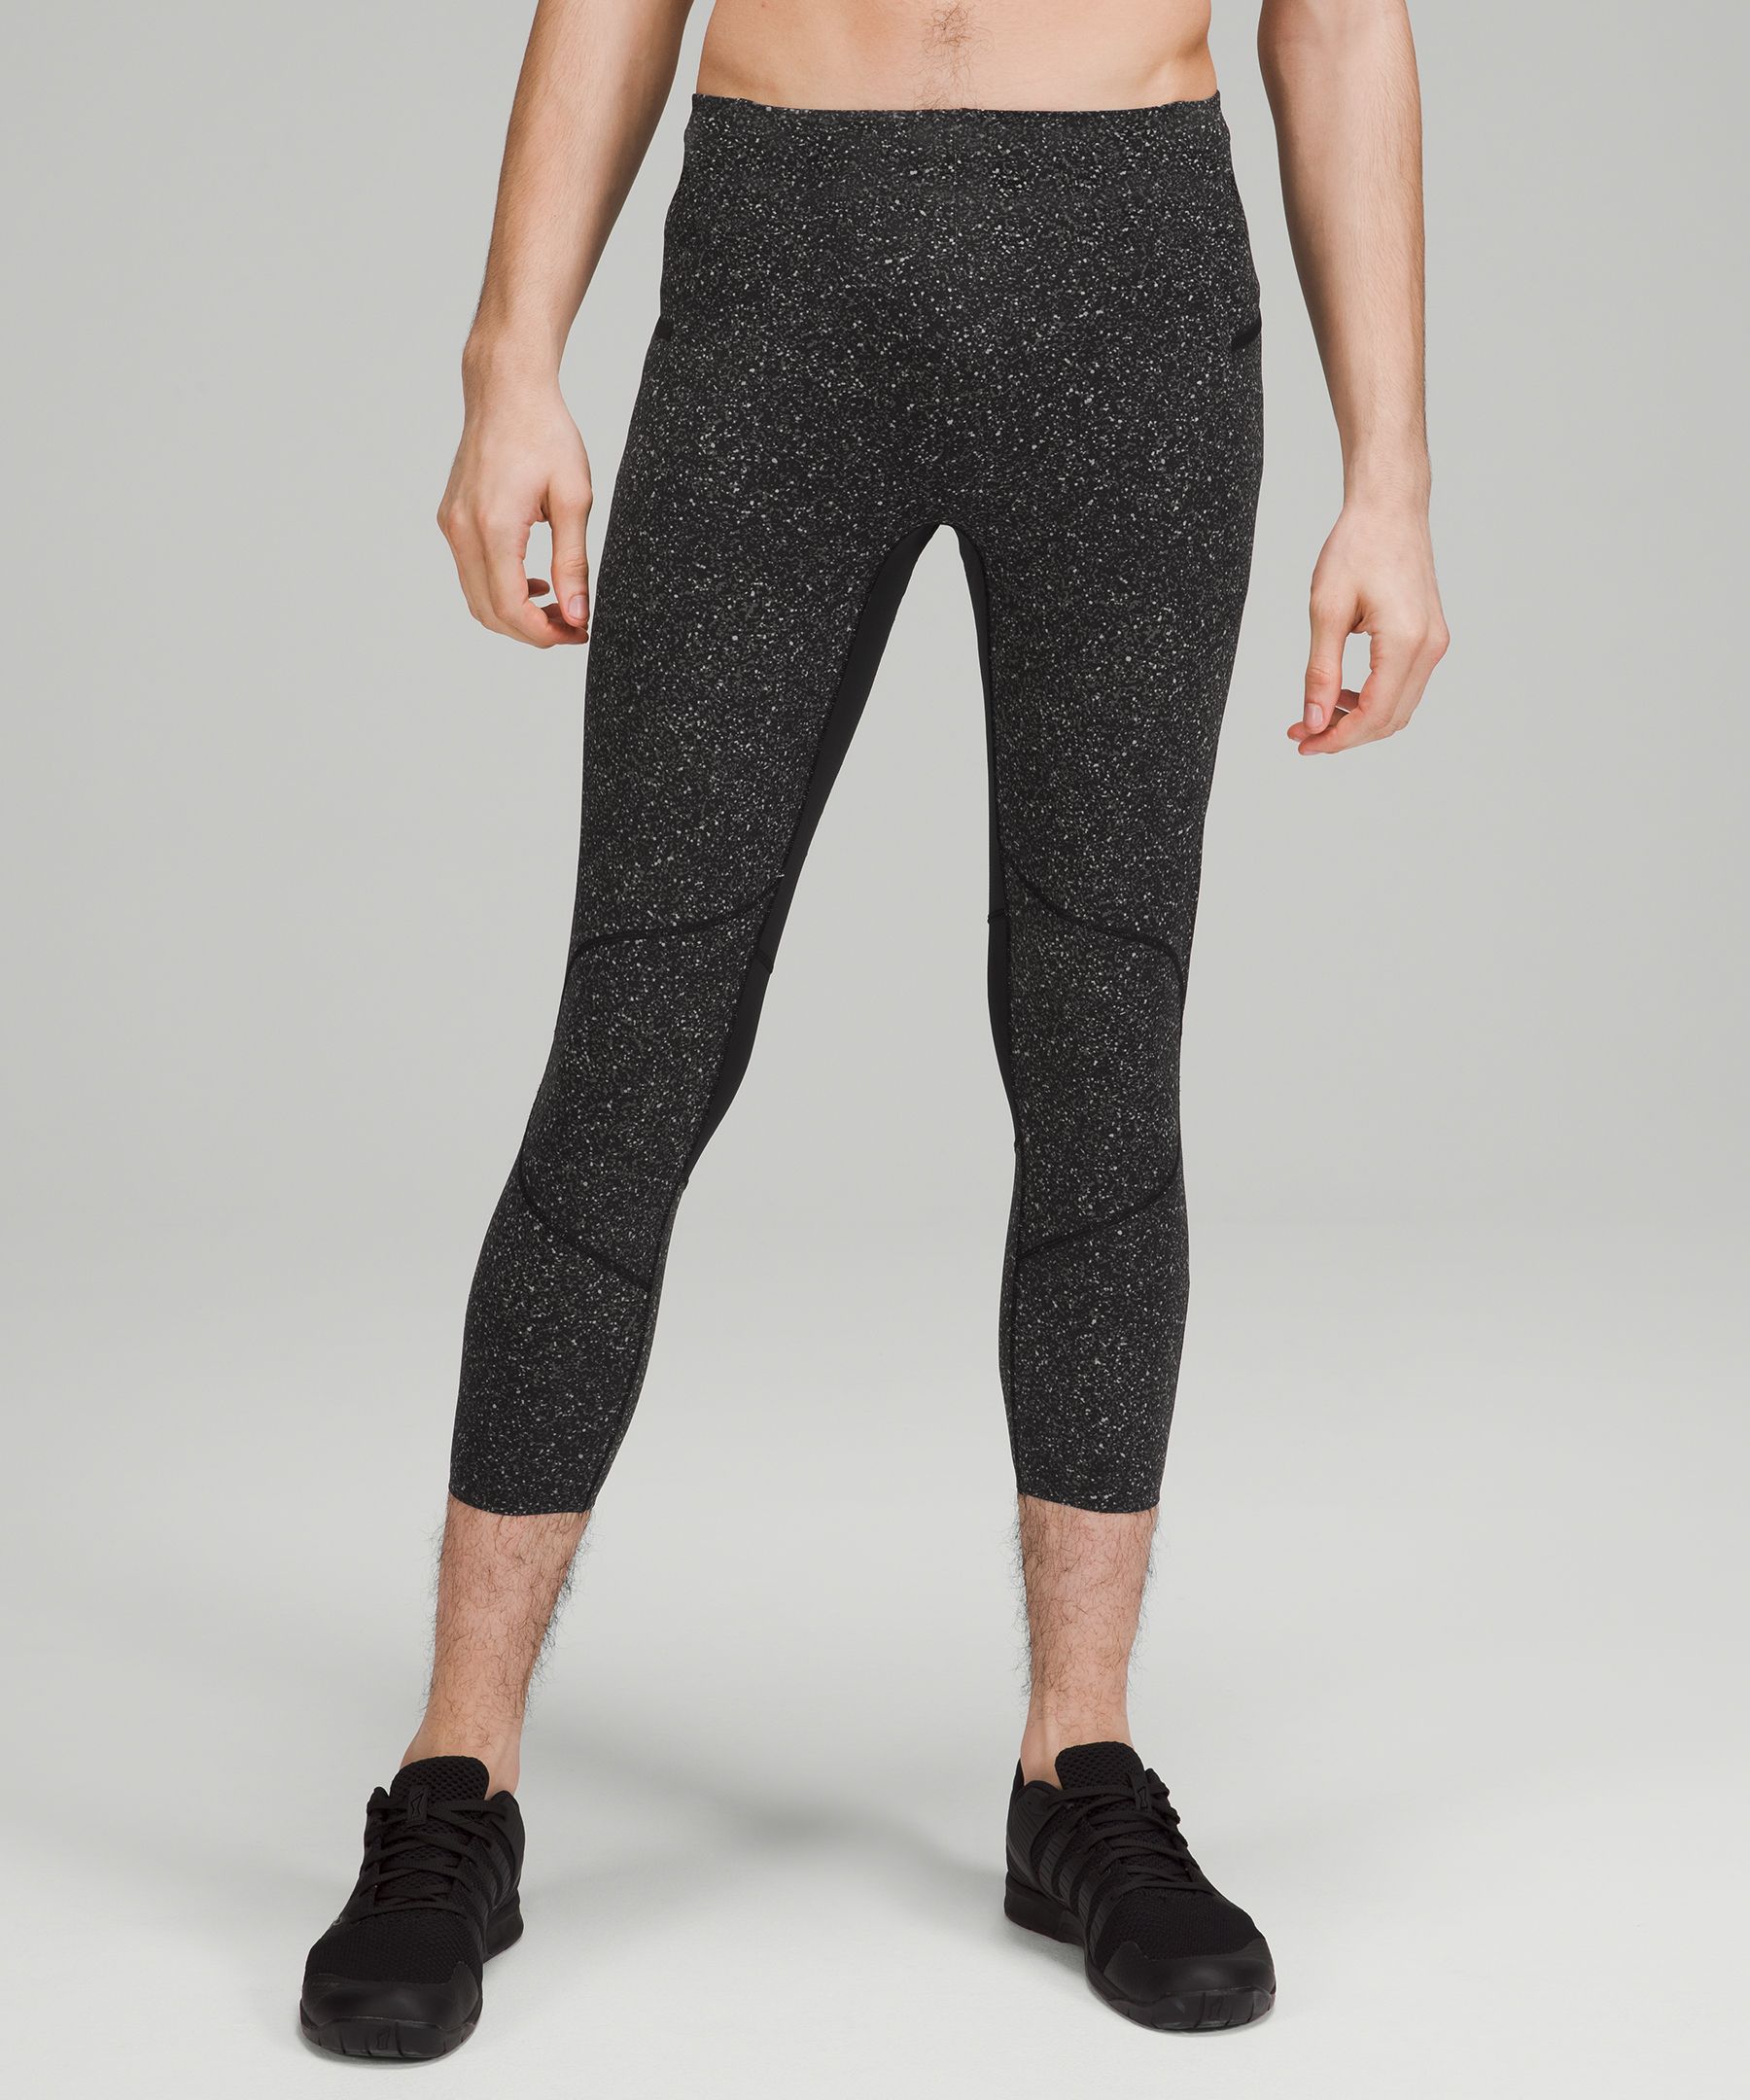 Lululemon Surge Tight Review  International Society of Precision